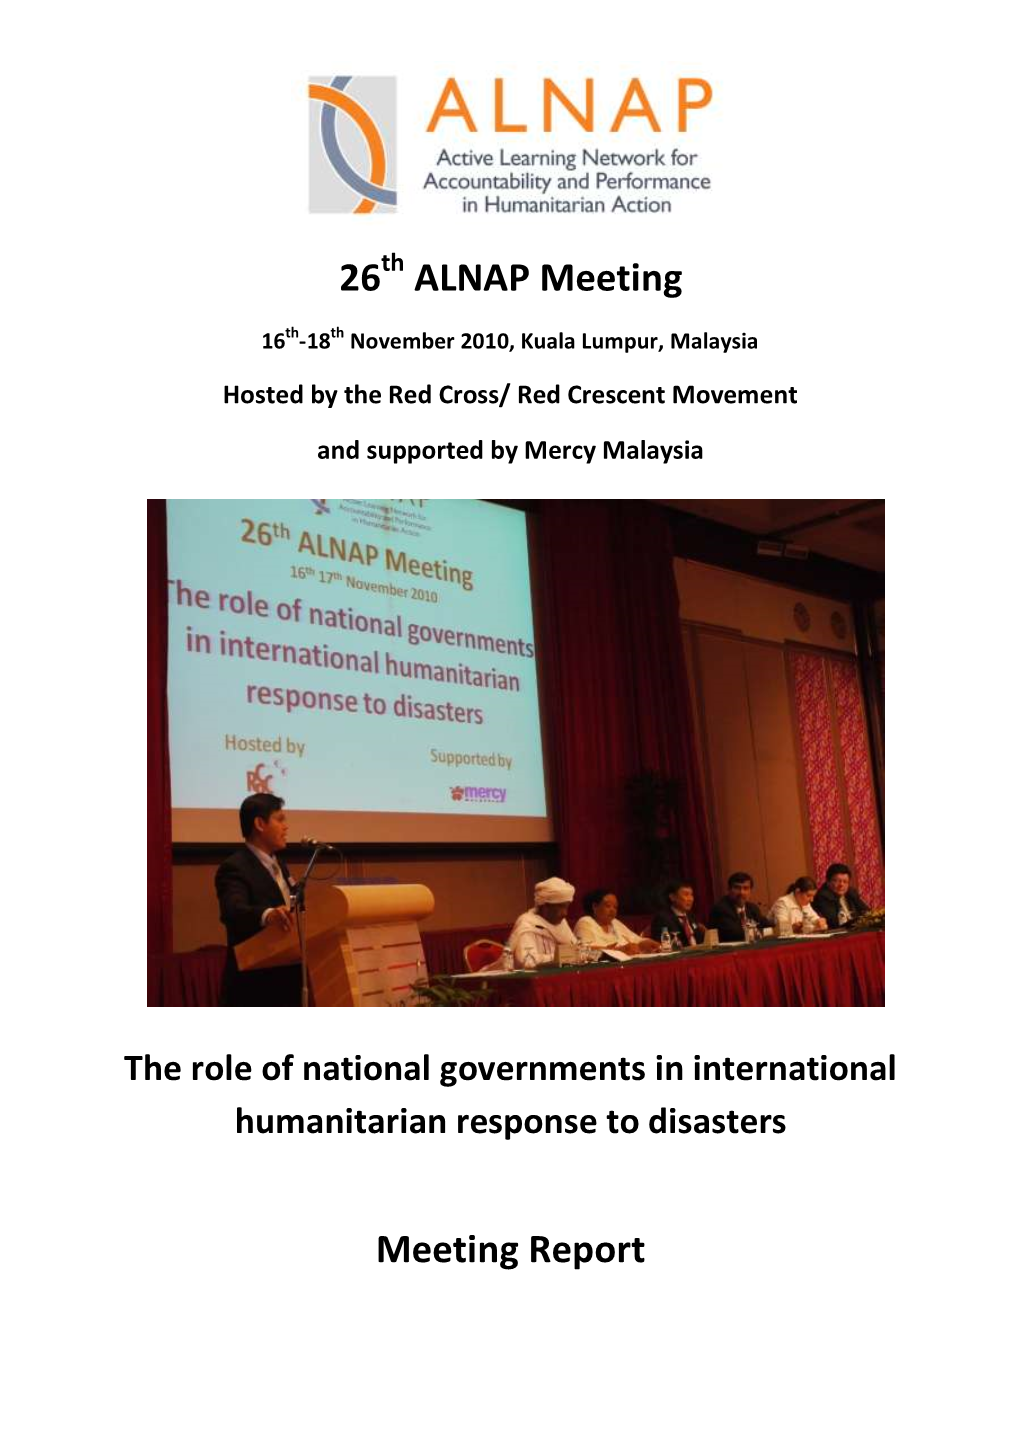 The Role of National Governments in International Humanitarian Response to Disasters